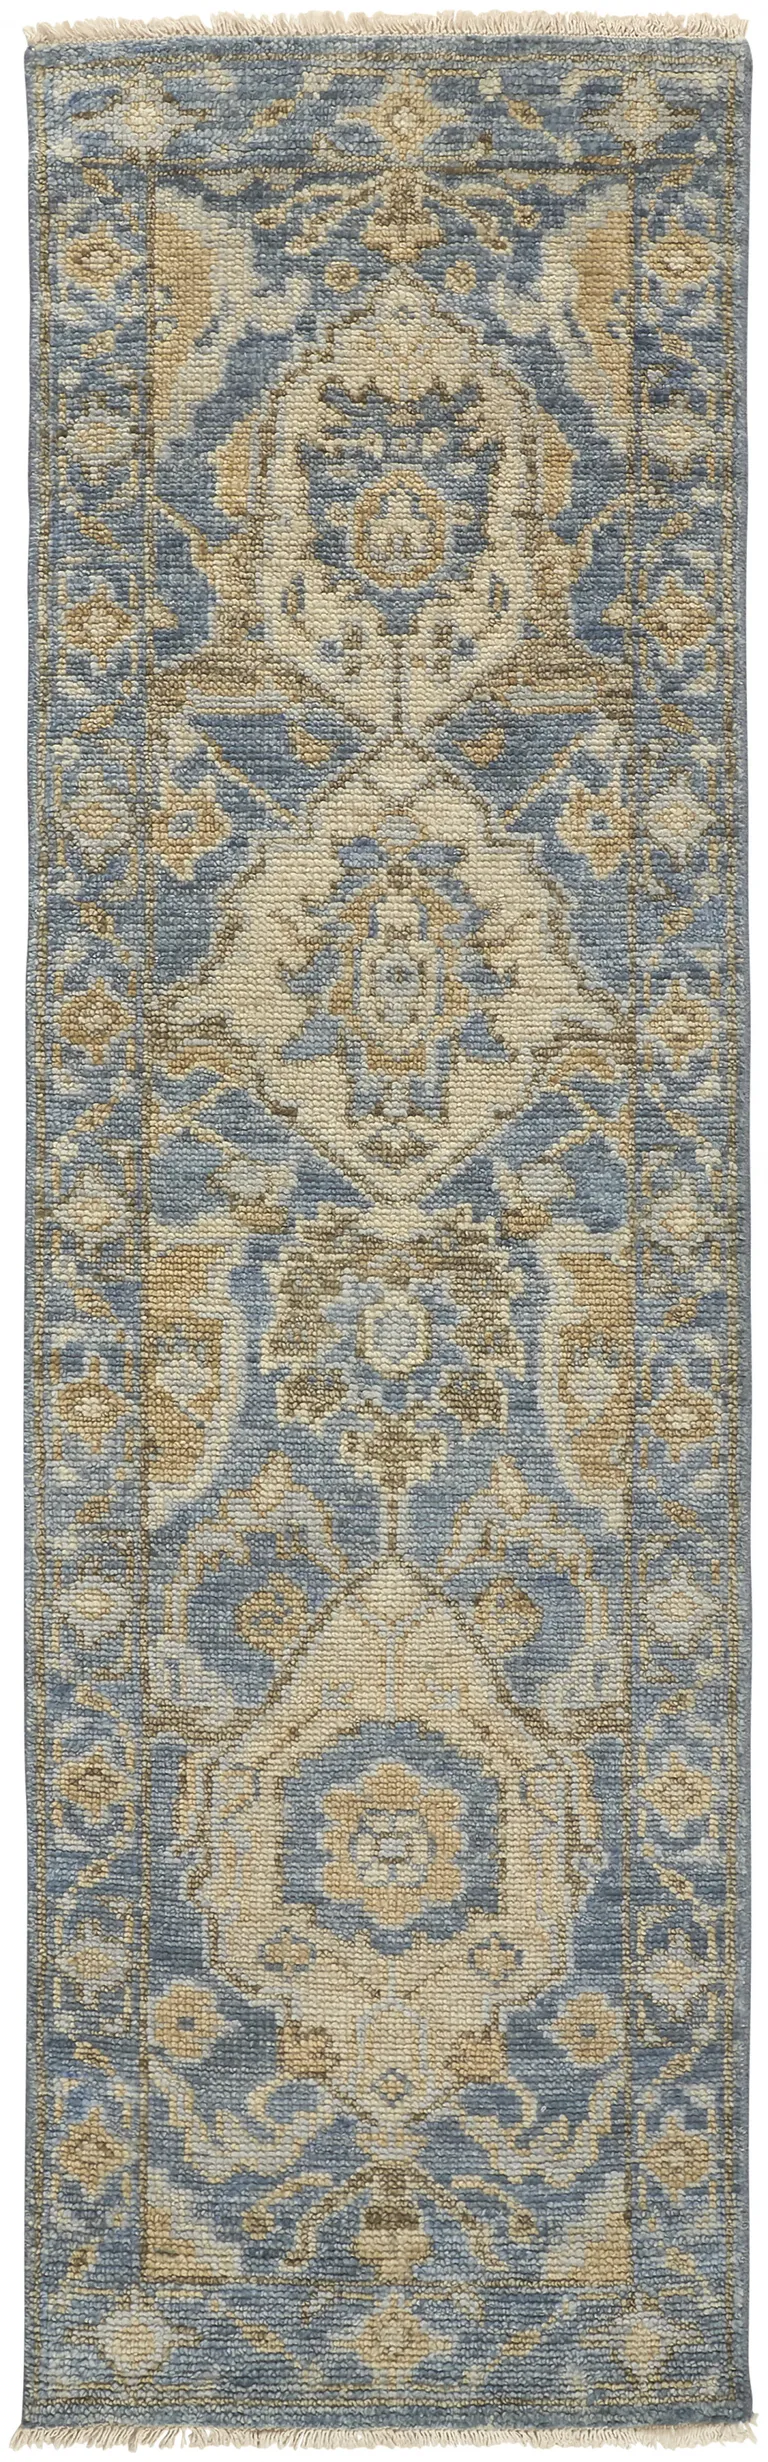 8' Blue Gold And Tan Wool Floral Hand Knotted Stain Resistant Runner Rug With Fringe Photo 1